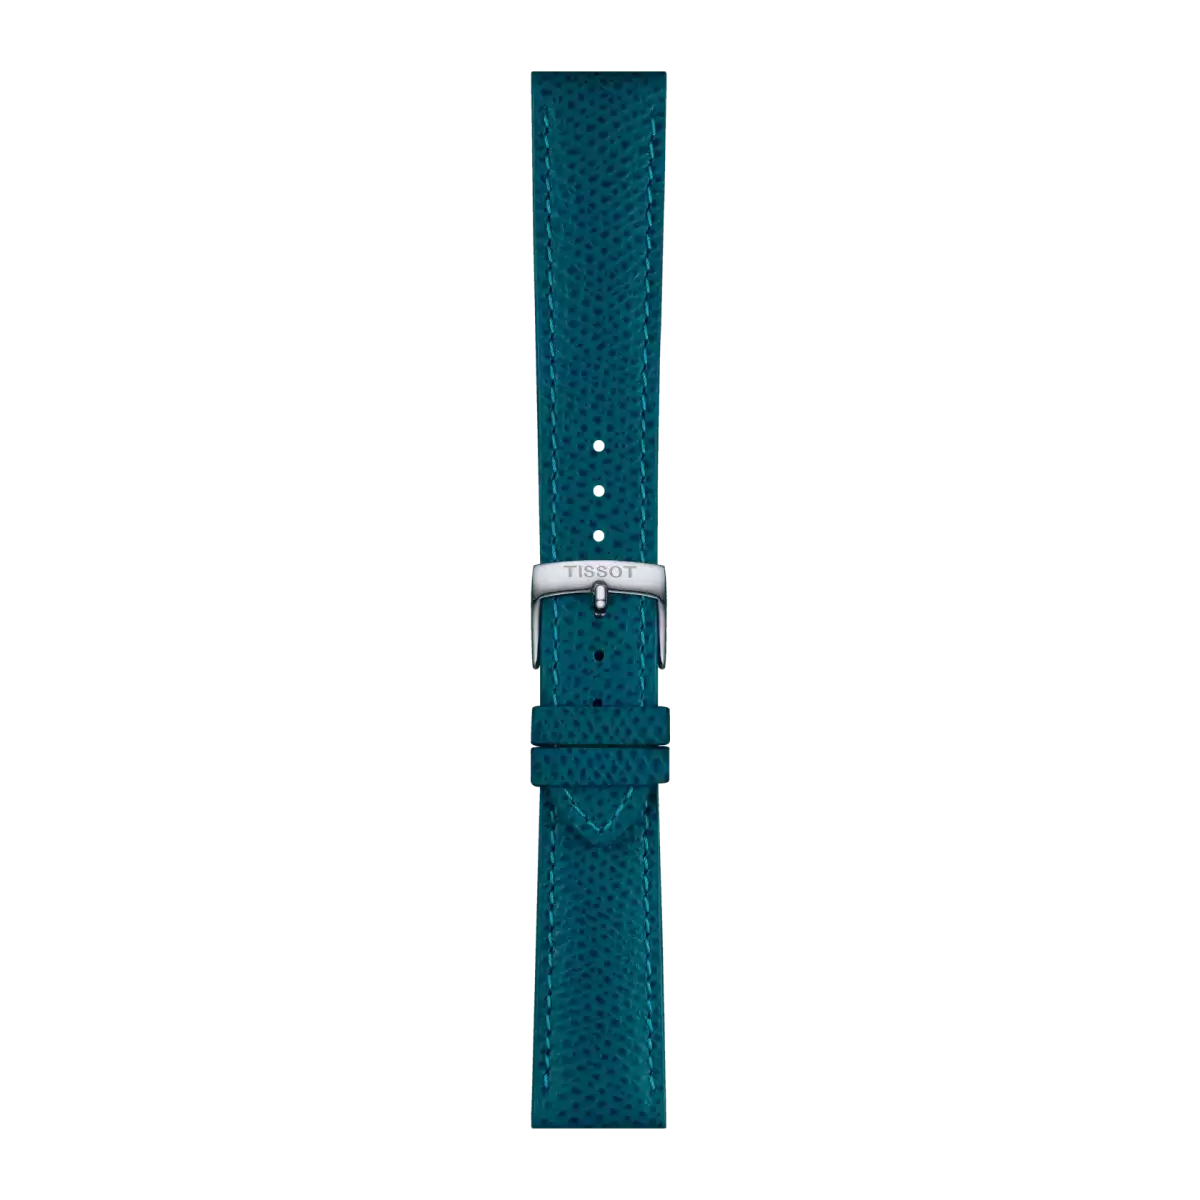  Tissot turquoise leather strap 18 mm 